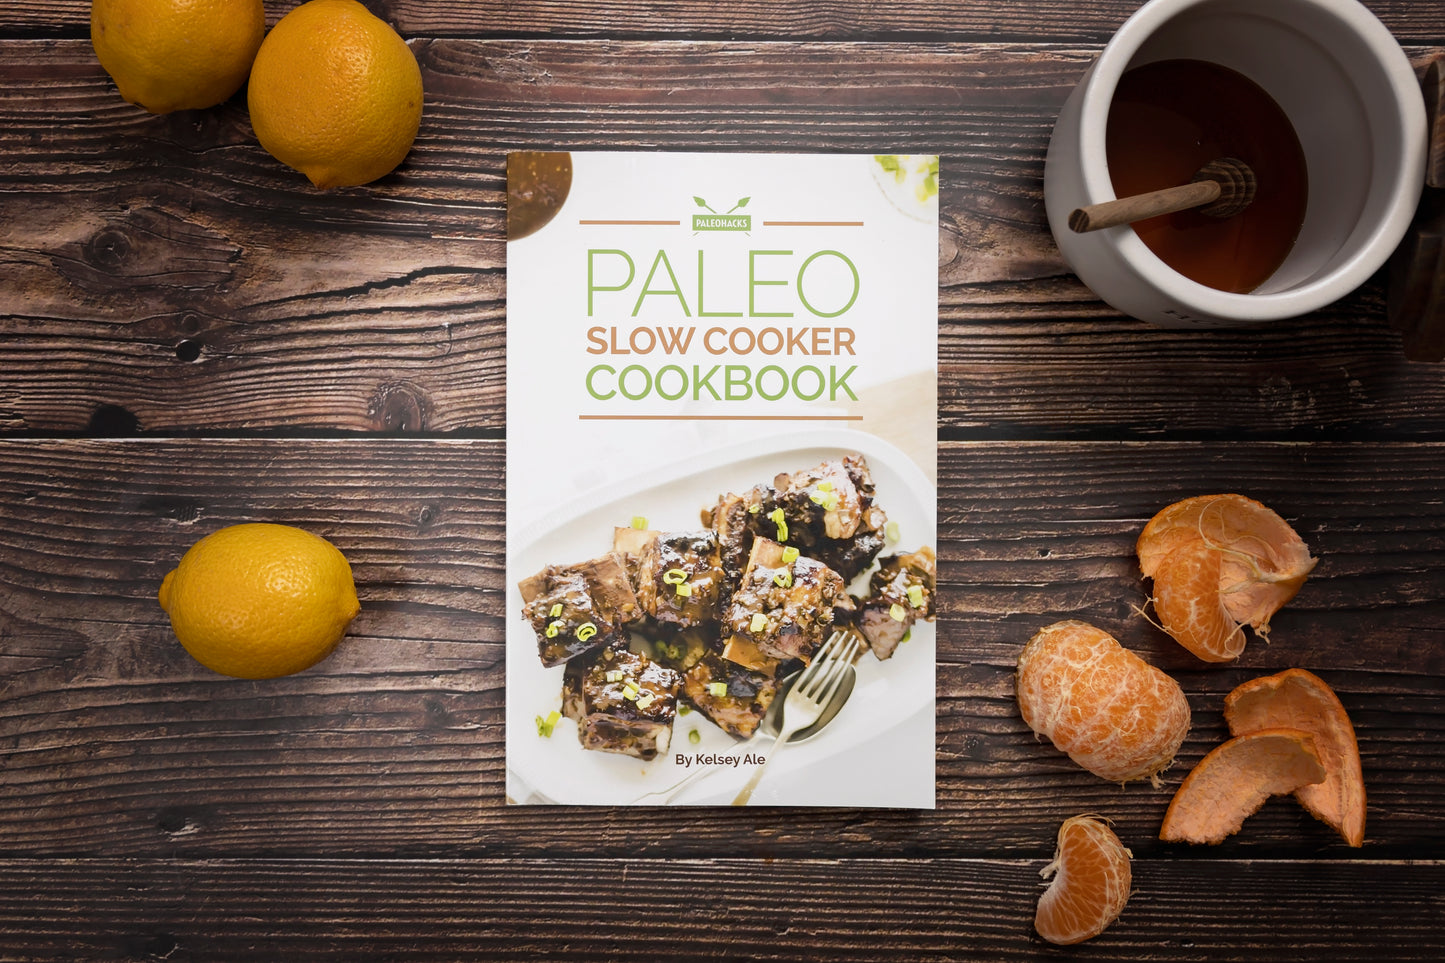 Paleo Slow Cooker Cookbook placed on a wooden surface with lemons and a jar of honey.